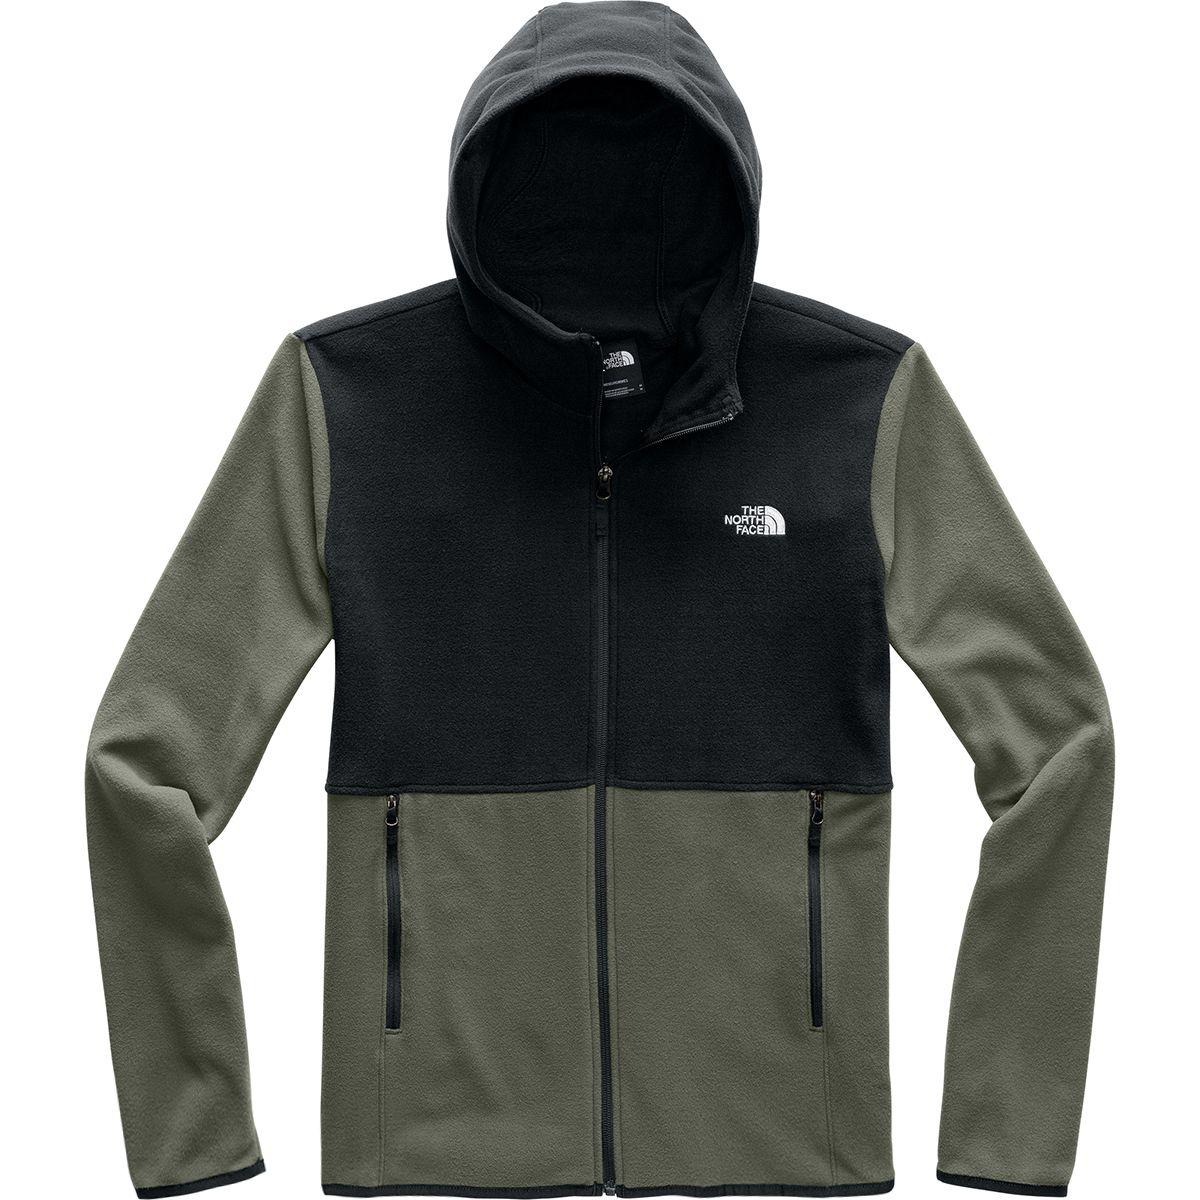 The North Face Tka Glacier Full-zip Hooded Fleece Jacket in Green for